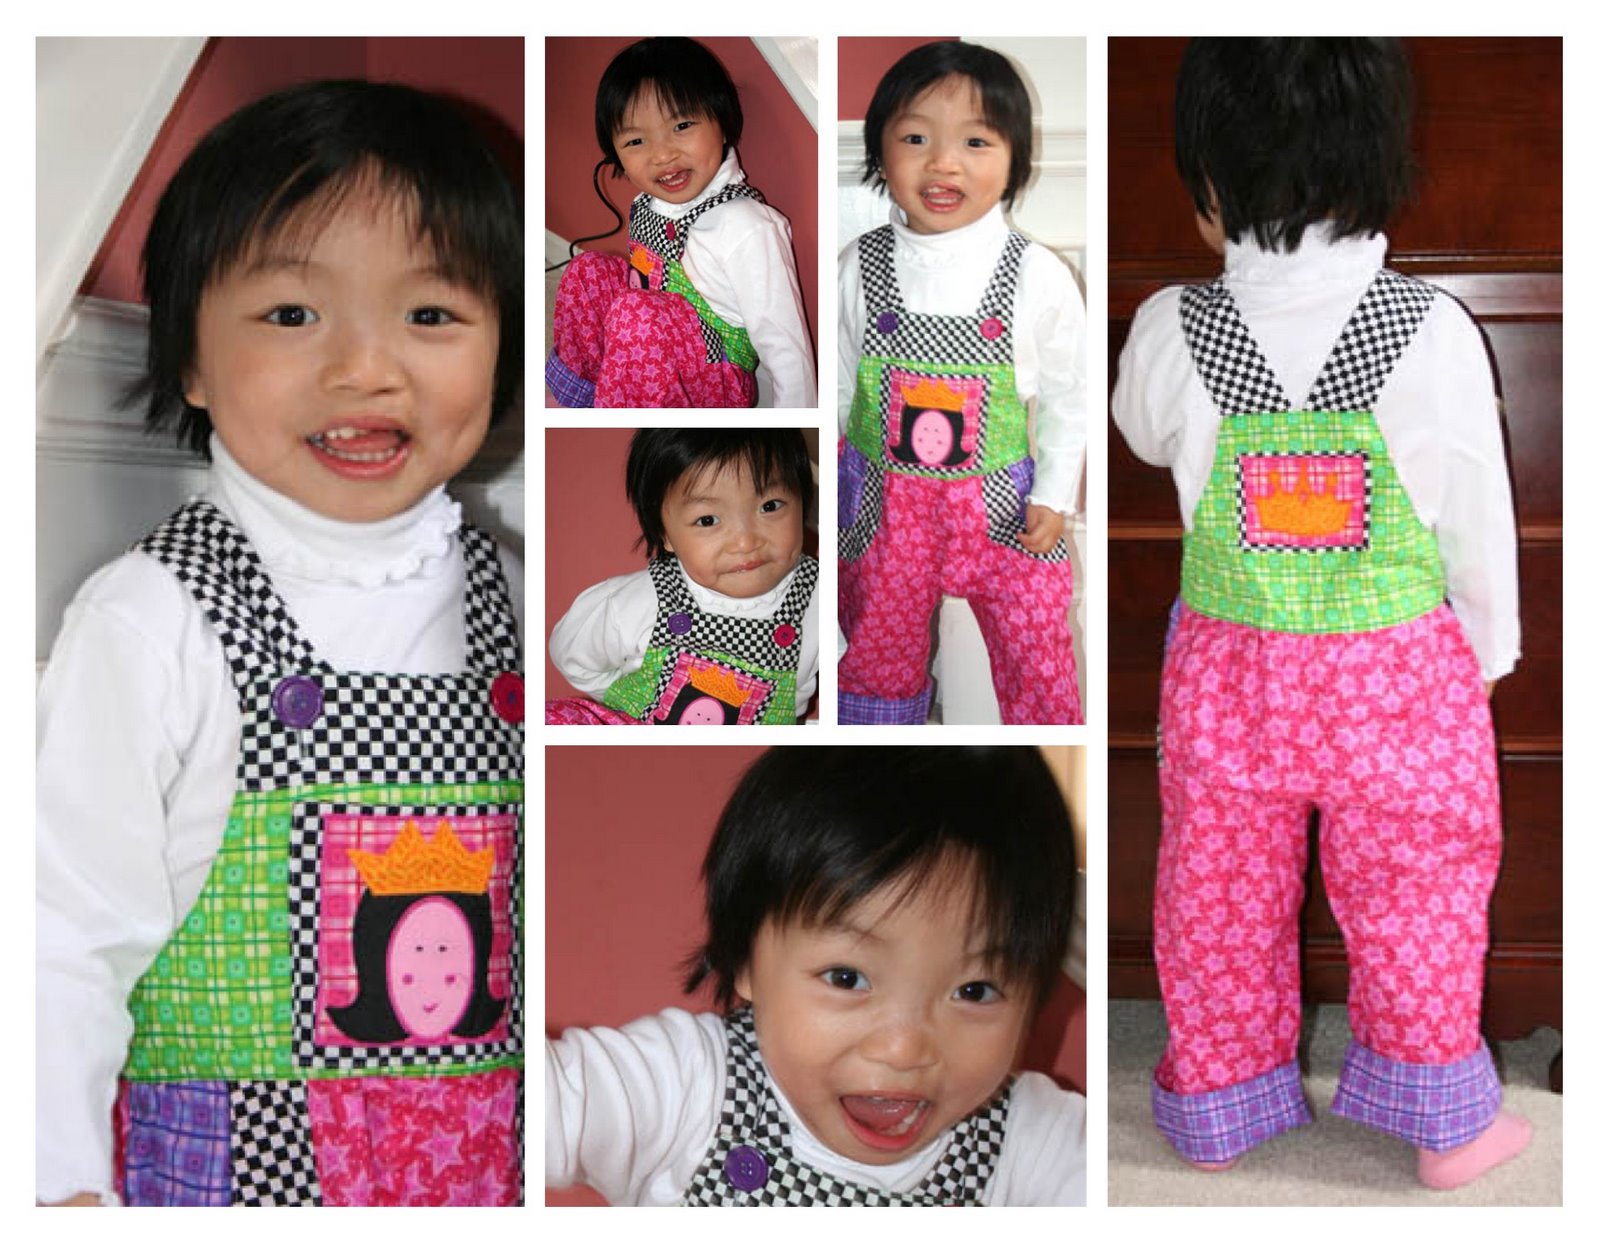 [collageoveralls_Page000.jpg]